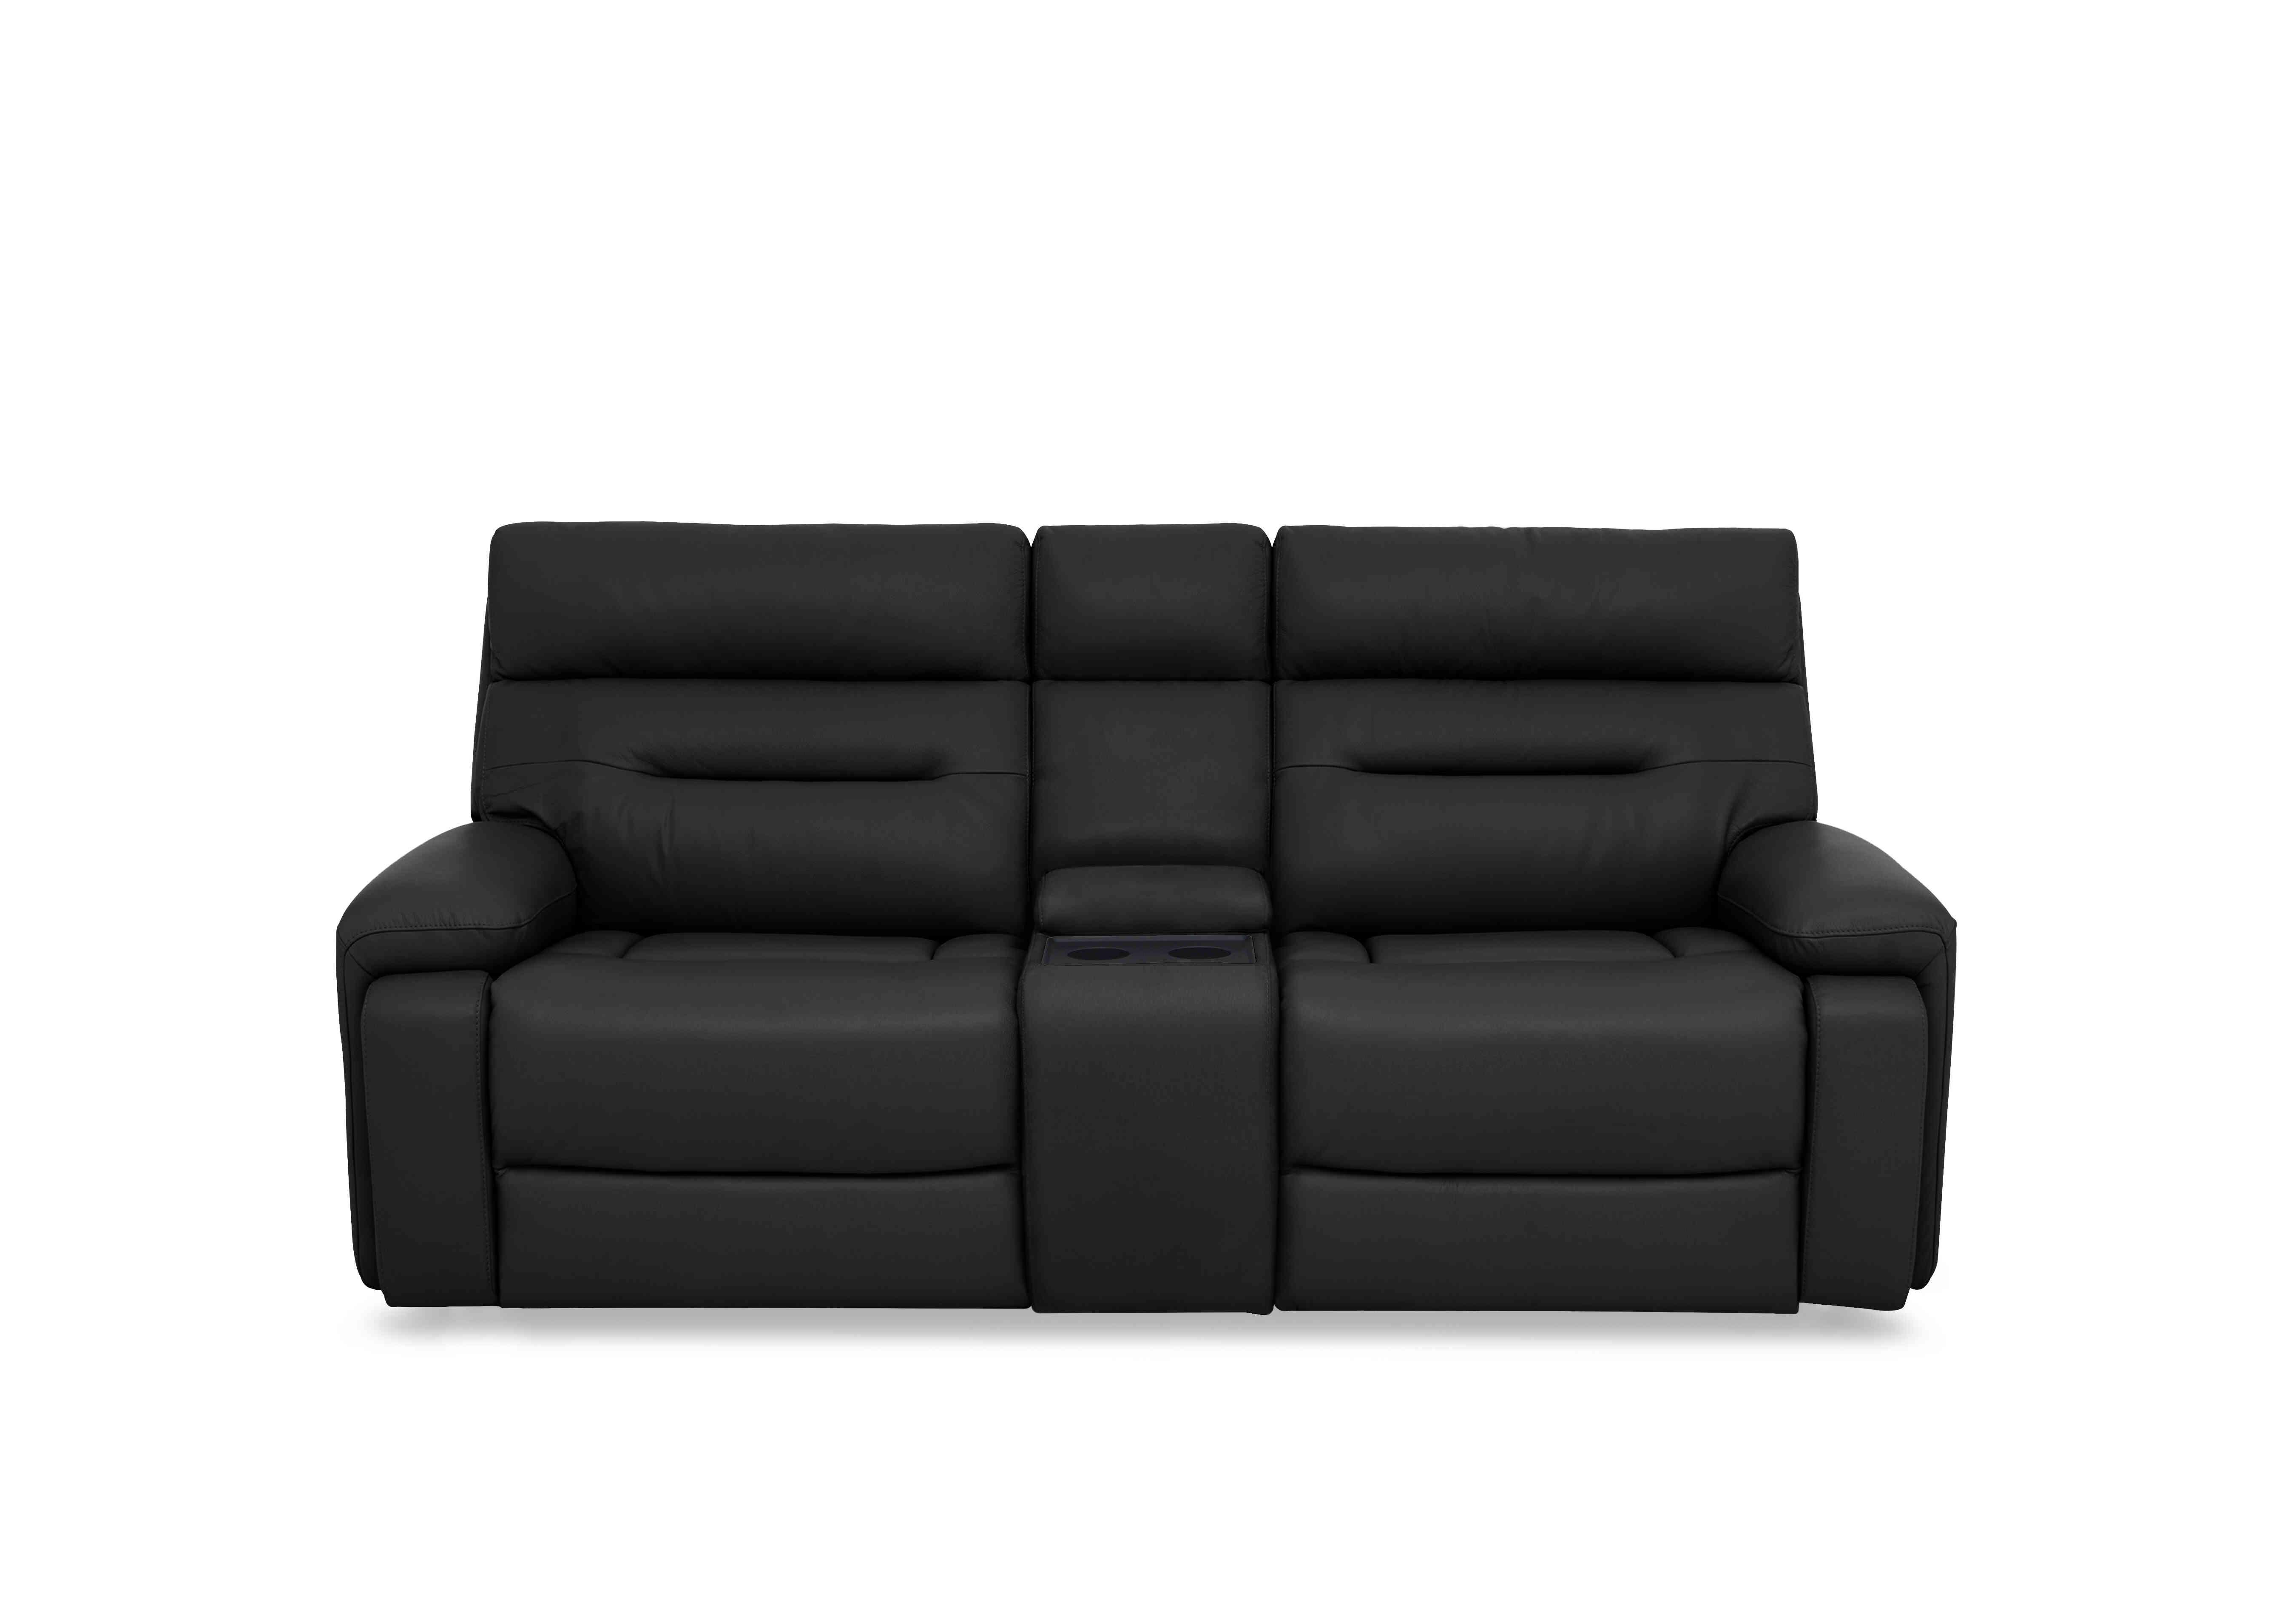 Cinemax Media 3 Seater Leather Power Recliner Sofa with Power Headrests in La4820 Natural Black Mica on Furniture Village